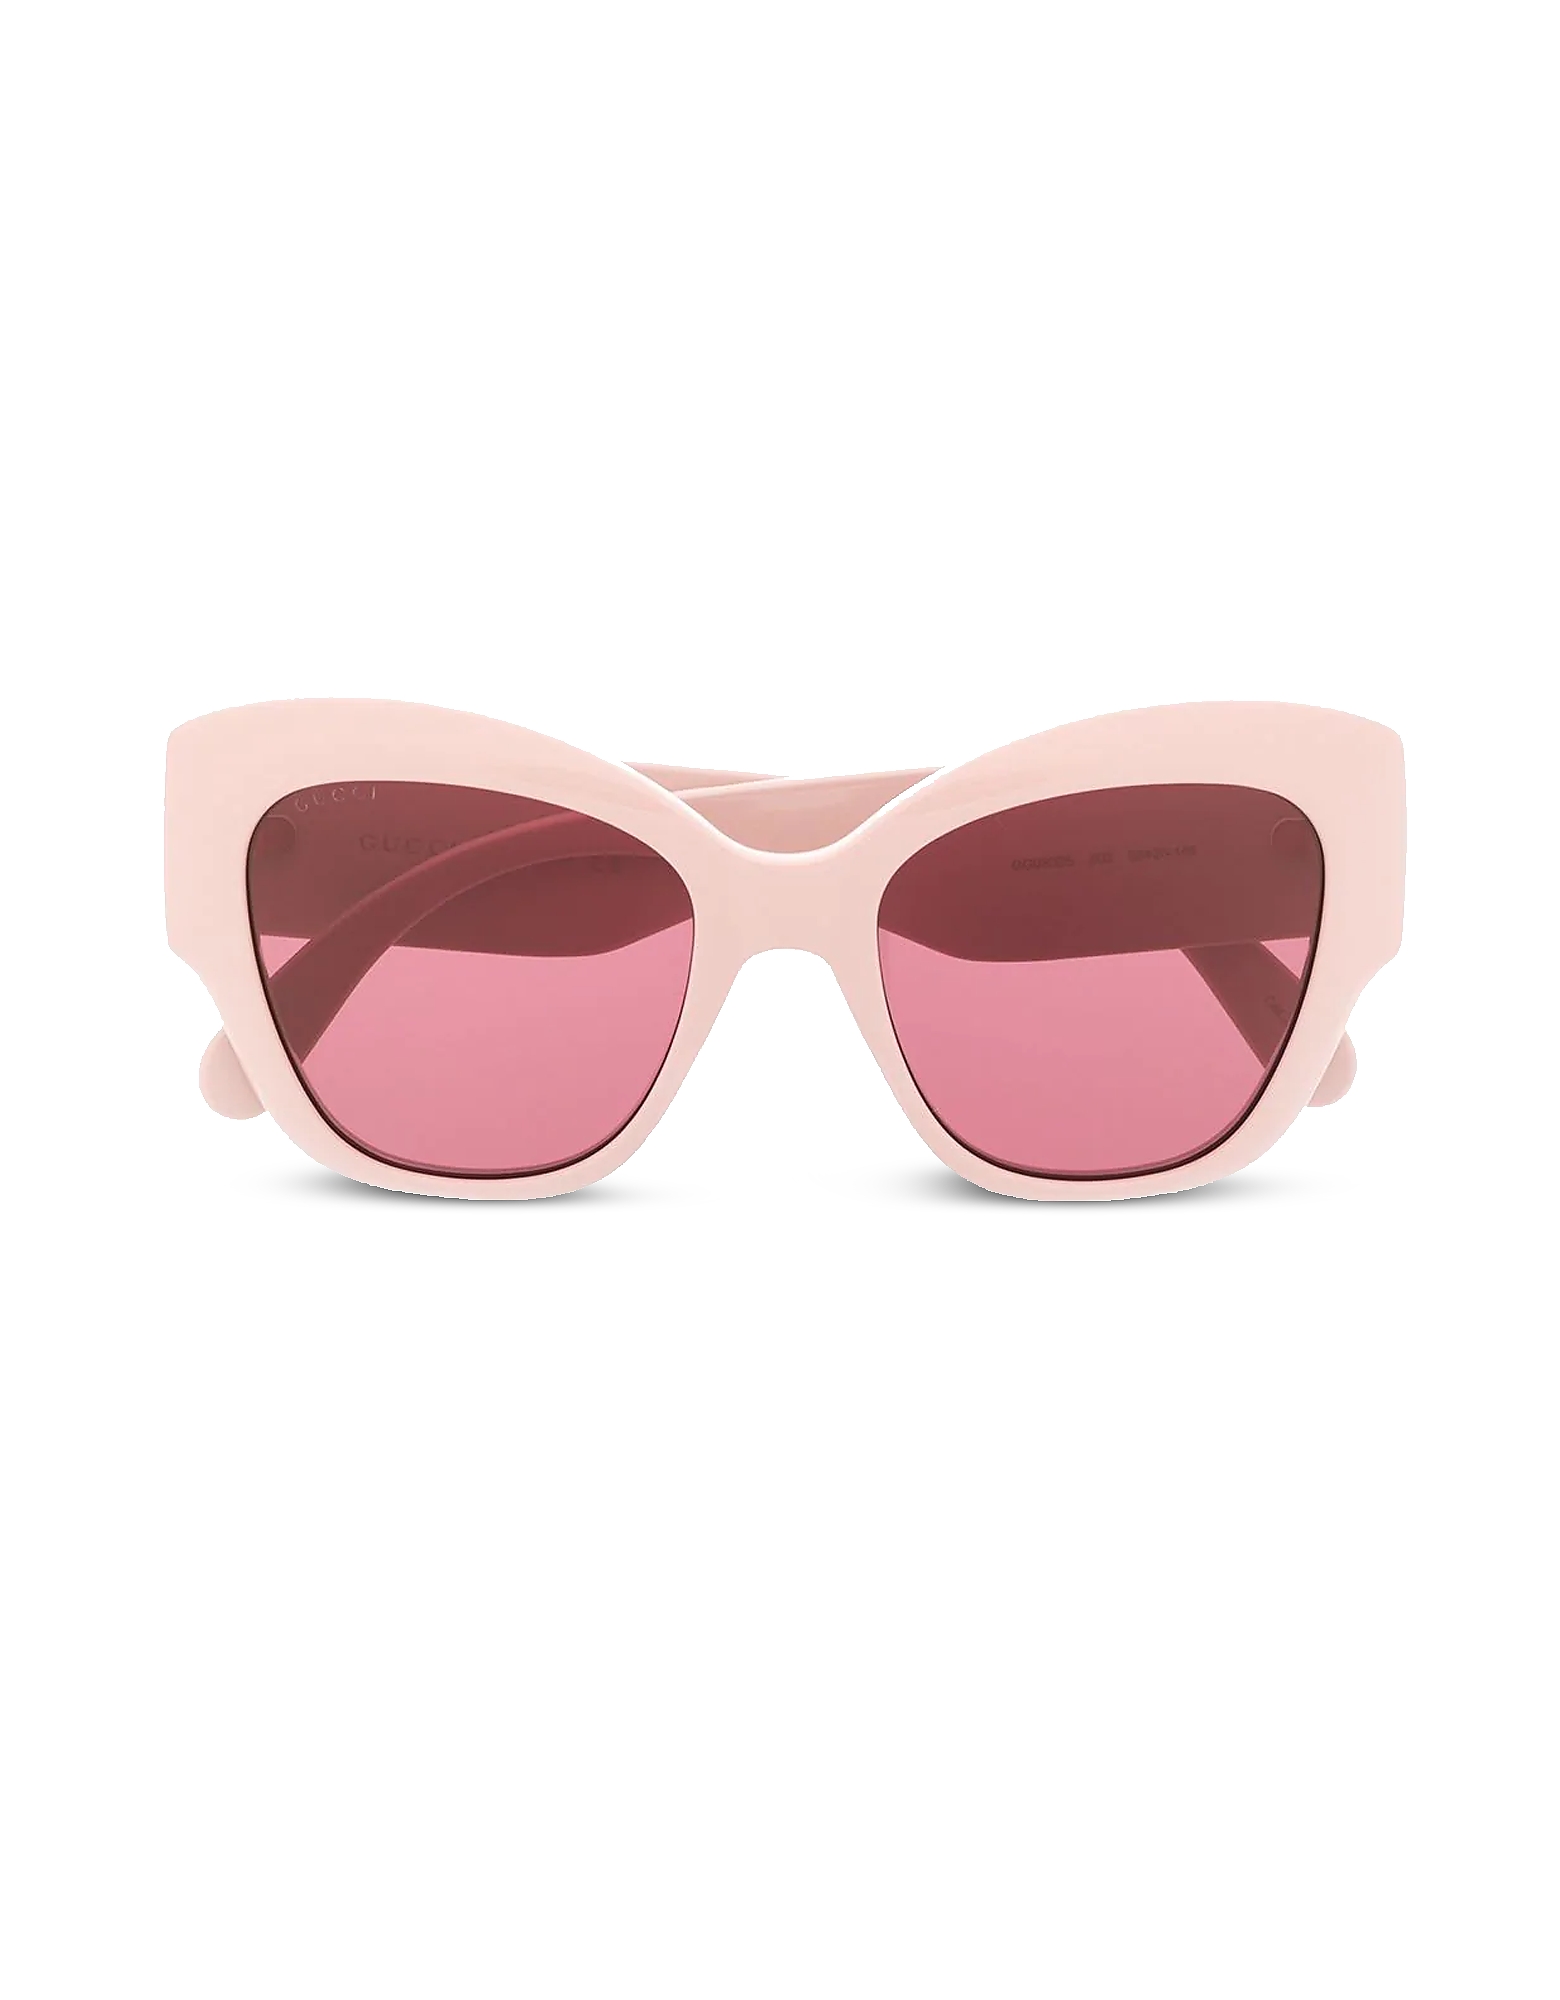 Gucci Sunglasses Pink Quilted Acetate Cat-eye Frame Women's Sunglasses